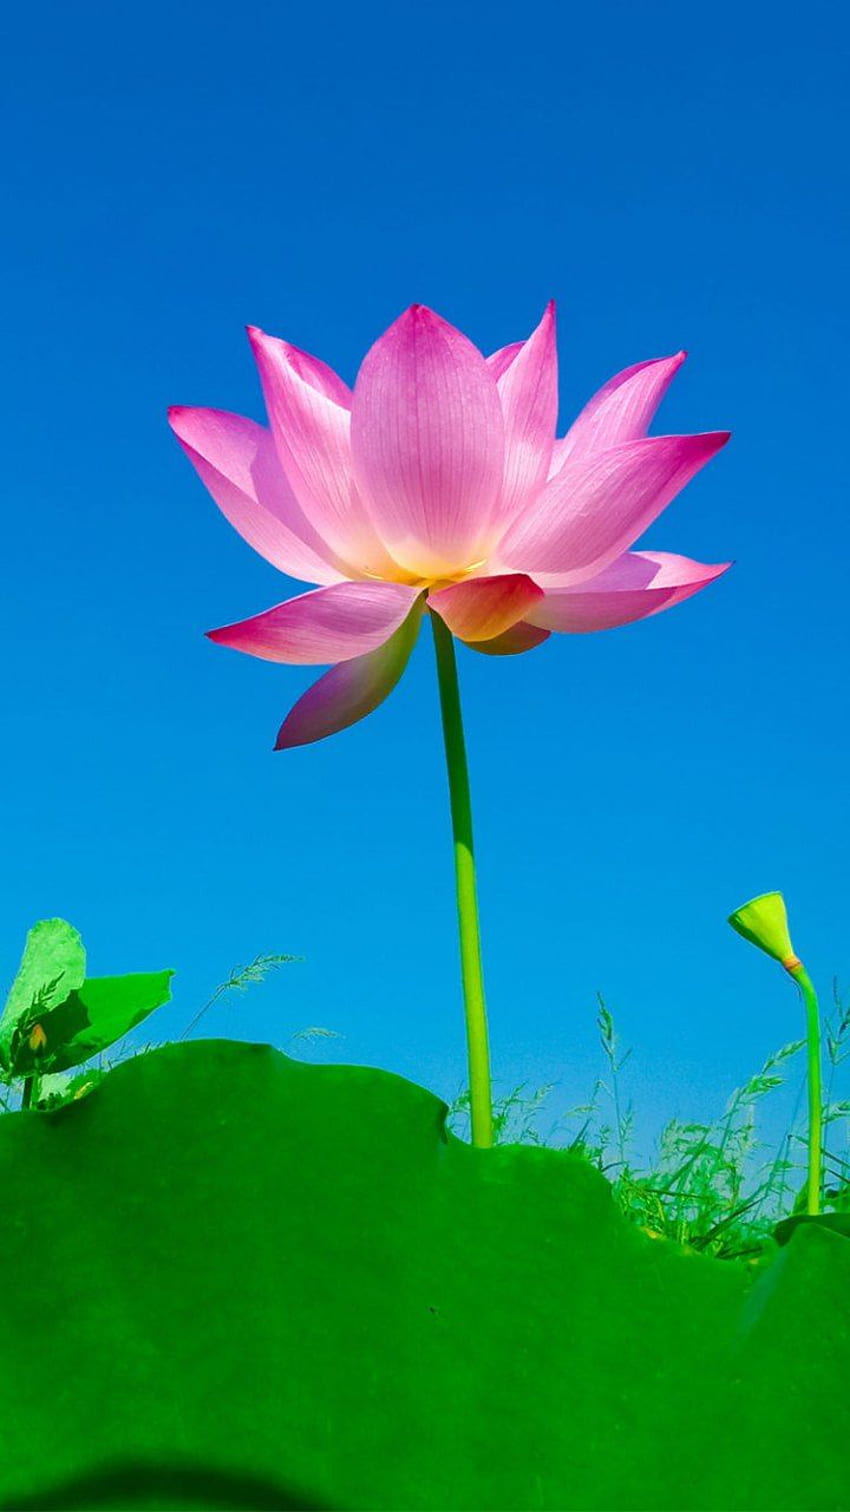 Download Lotus wallpapers for mobile phone free Lotus HD pictures